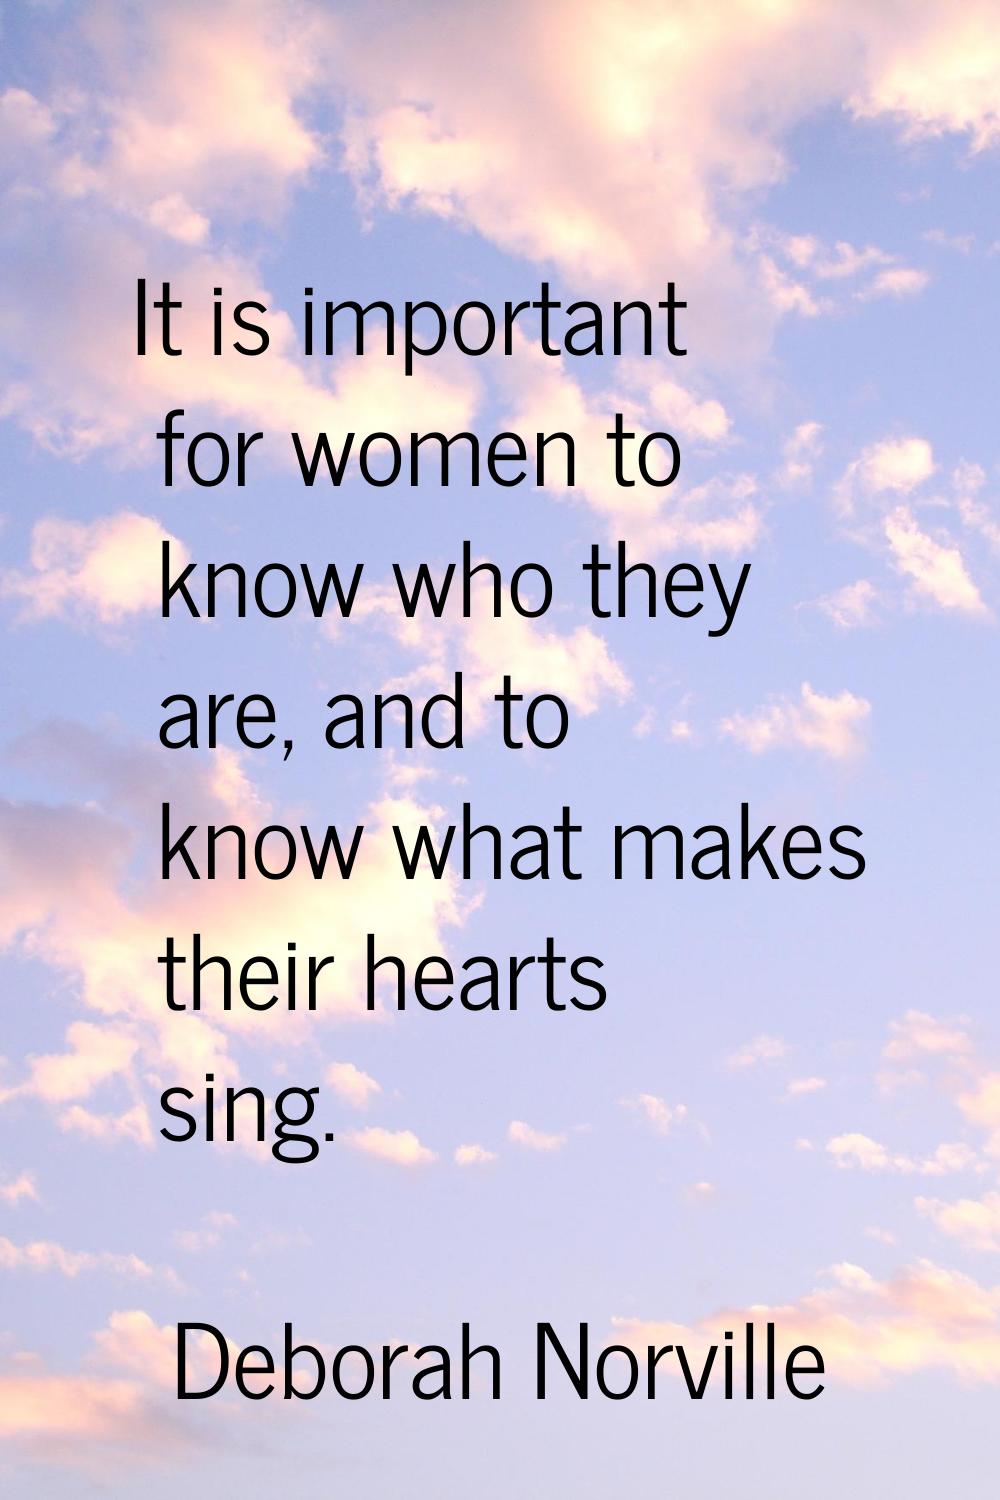 It is important for women to know who they are, and to know what makes their hearts sing.